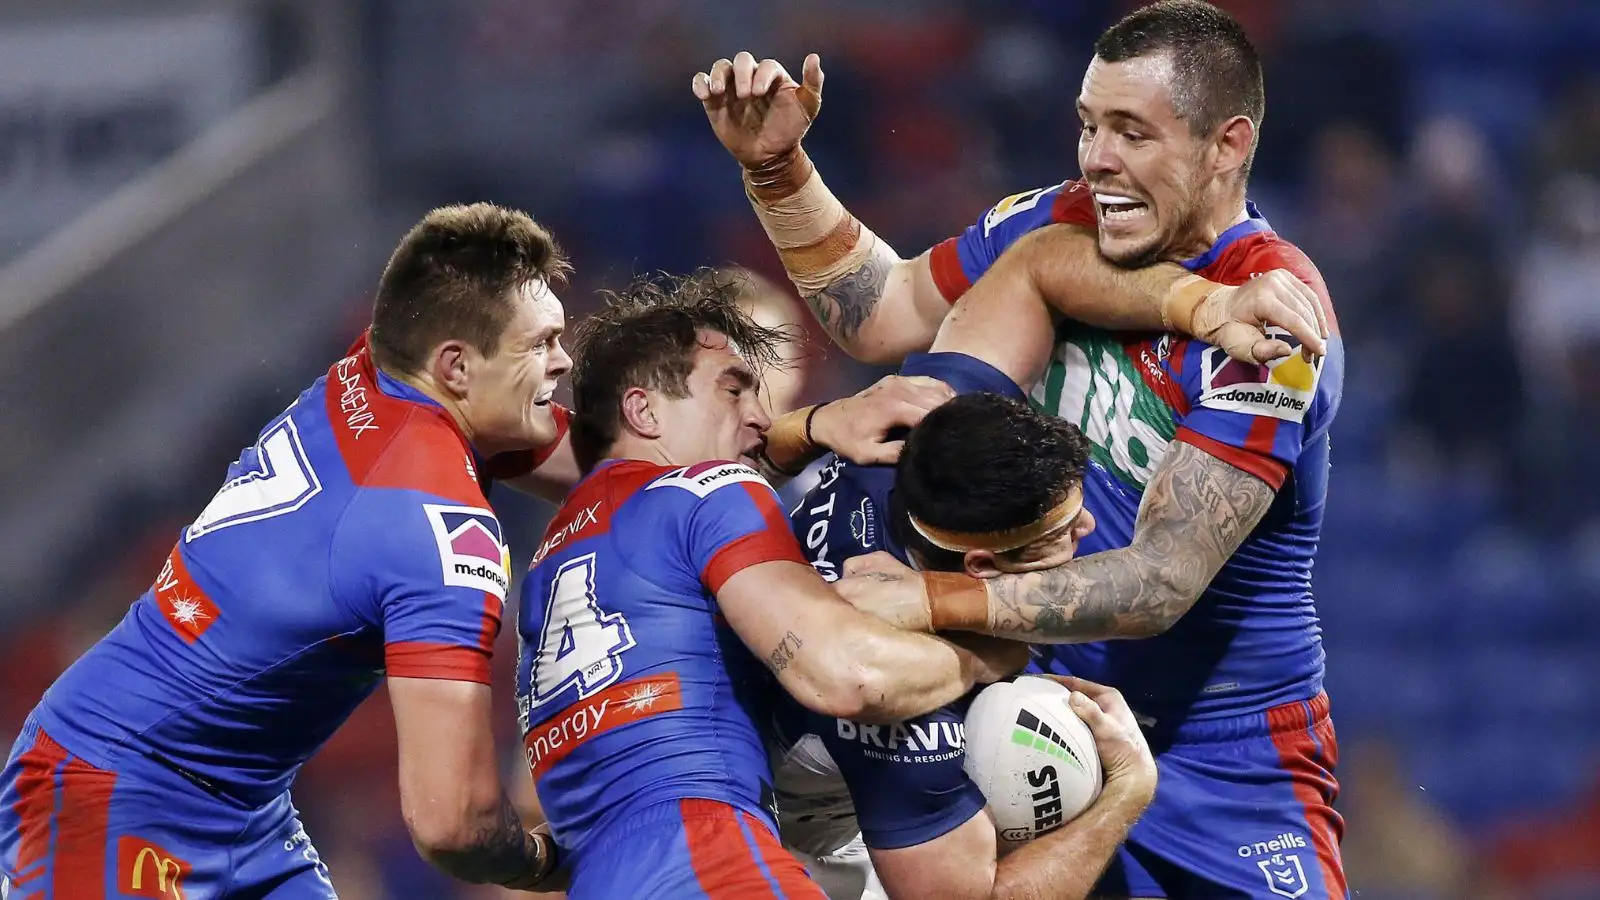 Connor Watson in action for Newcastle Knights in 2021 alongside then-team-mates Brodie Jones and David Klemmer. Photo by AAP Image/Darren Pateman.